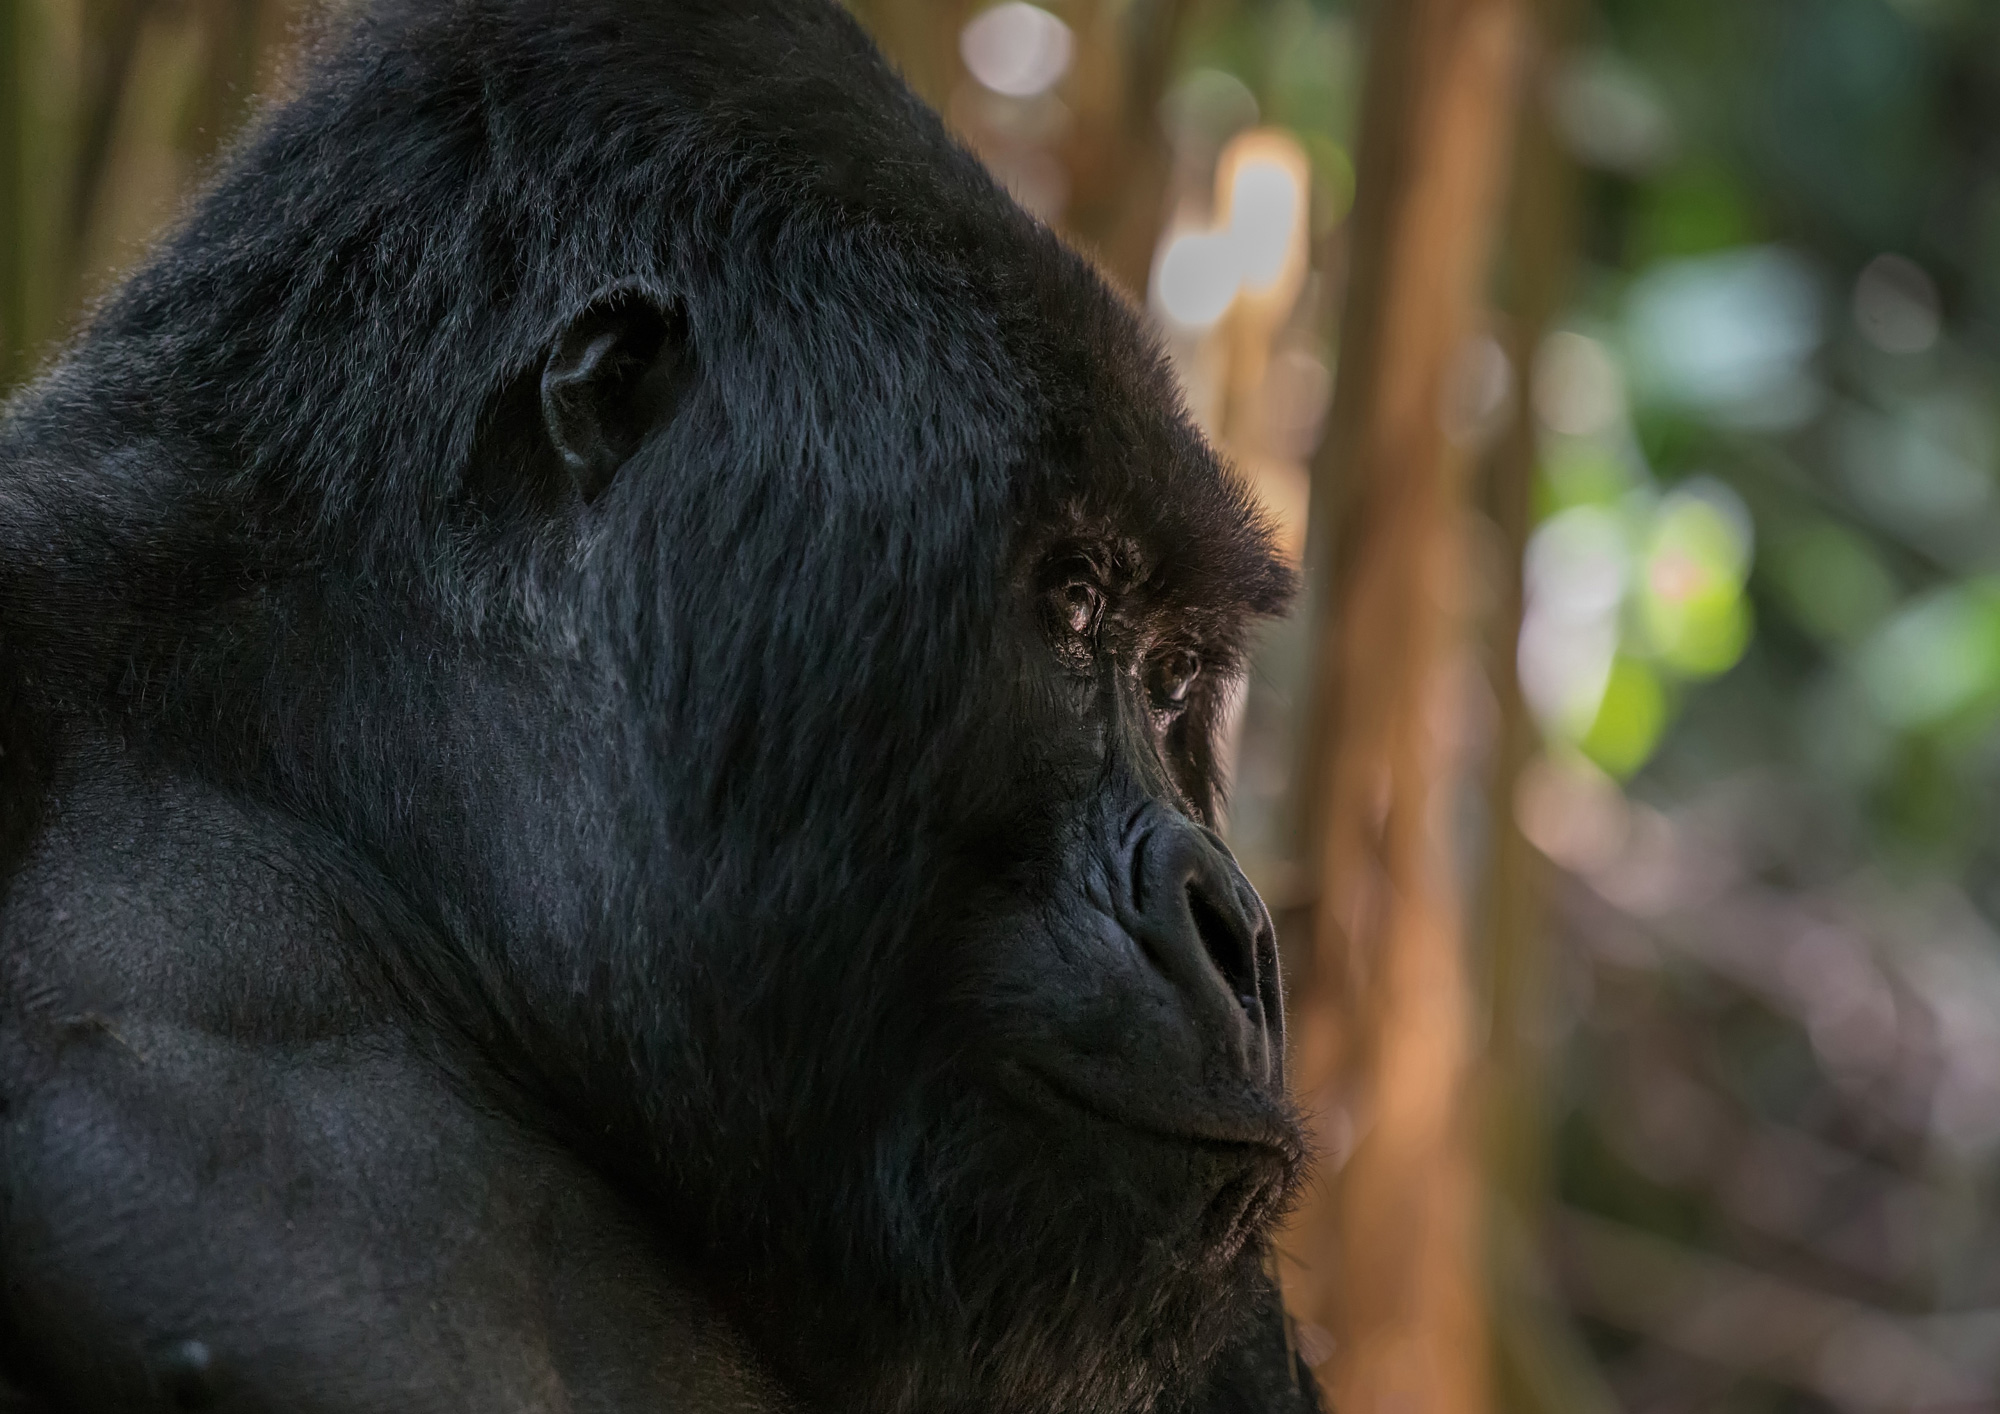 A closeup of a gorilla's face looking into the distance